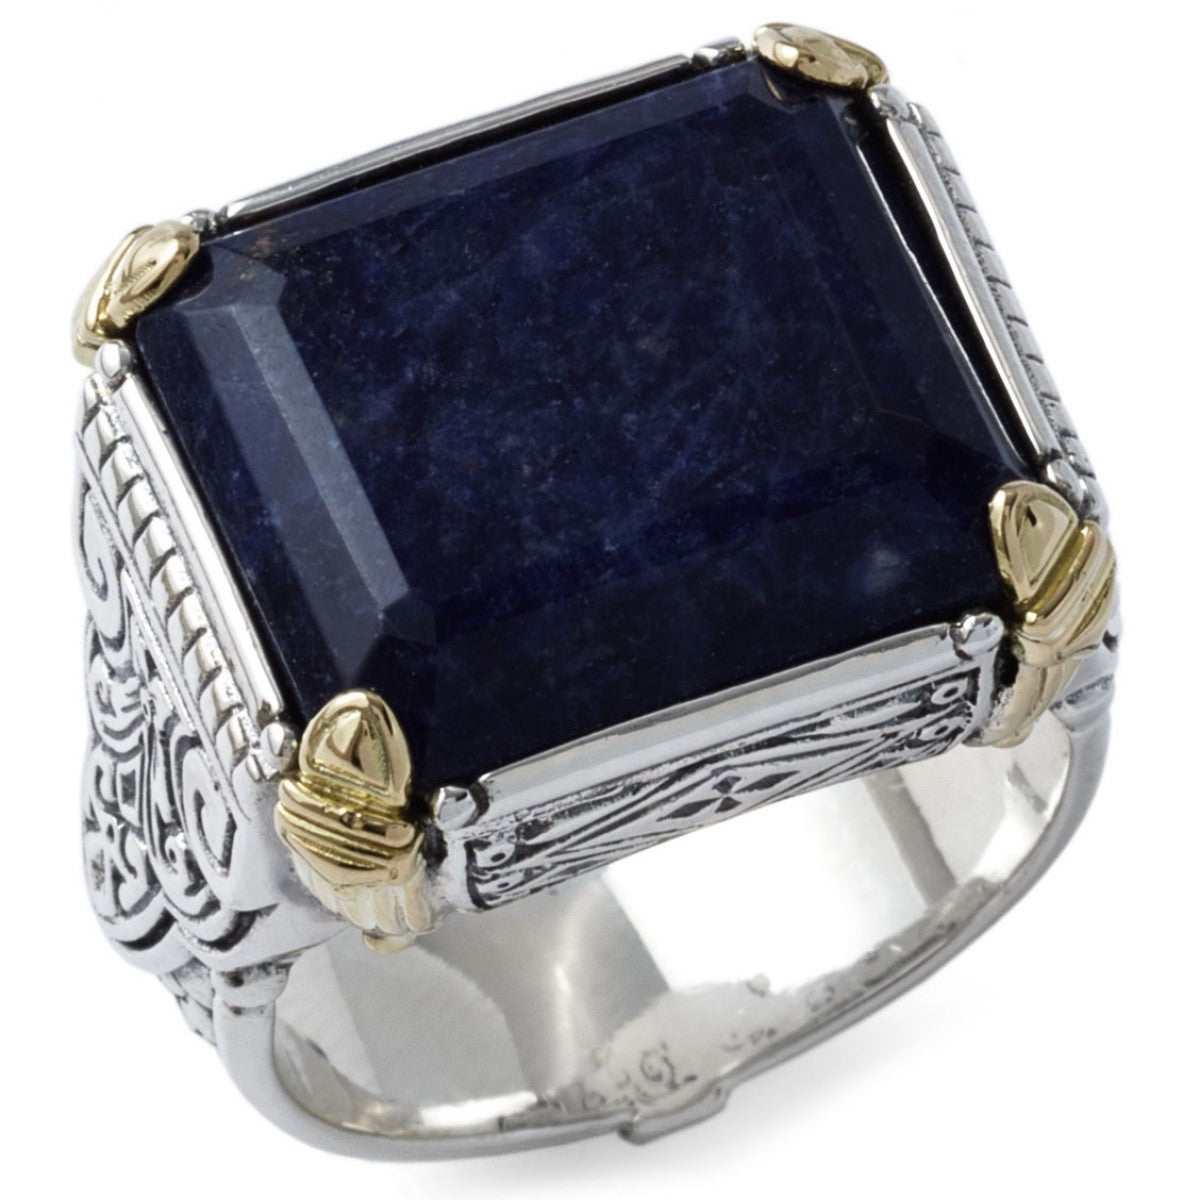 Konstantino Men's Sterling Silver and 18k Gold with Blue Sodolite Ring, Size 10